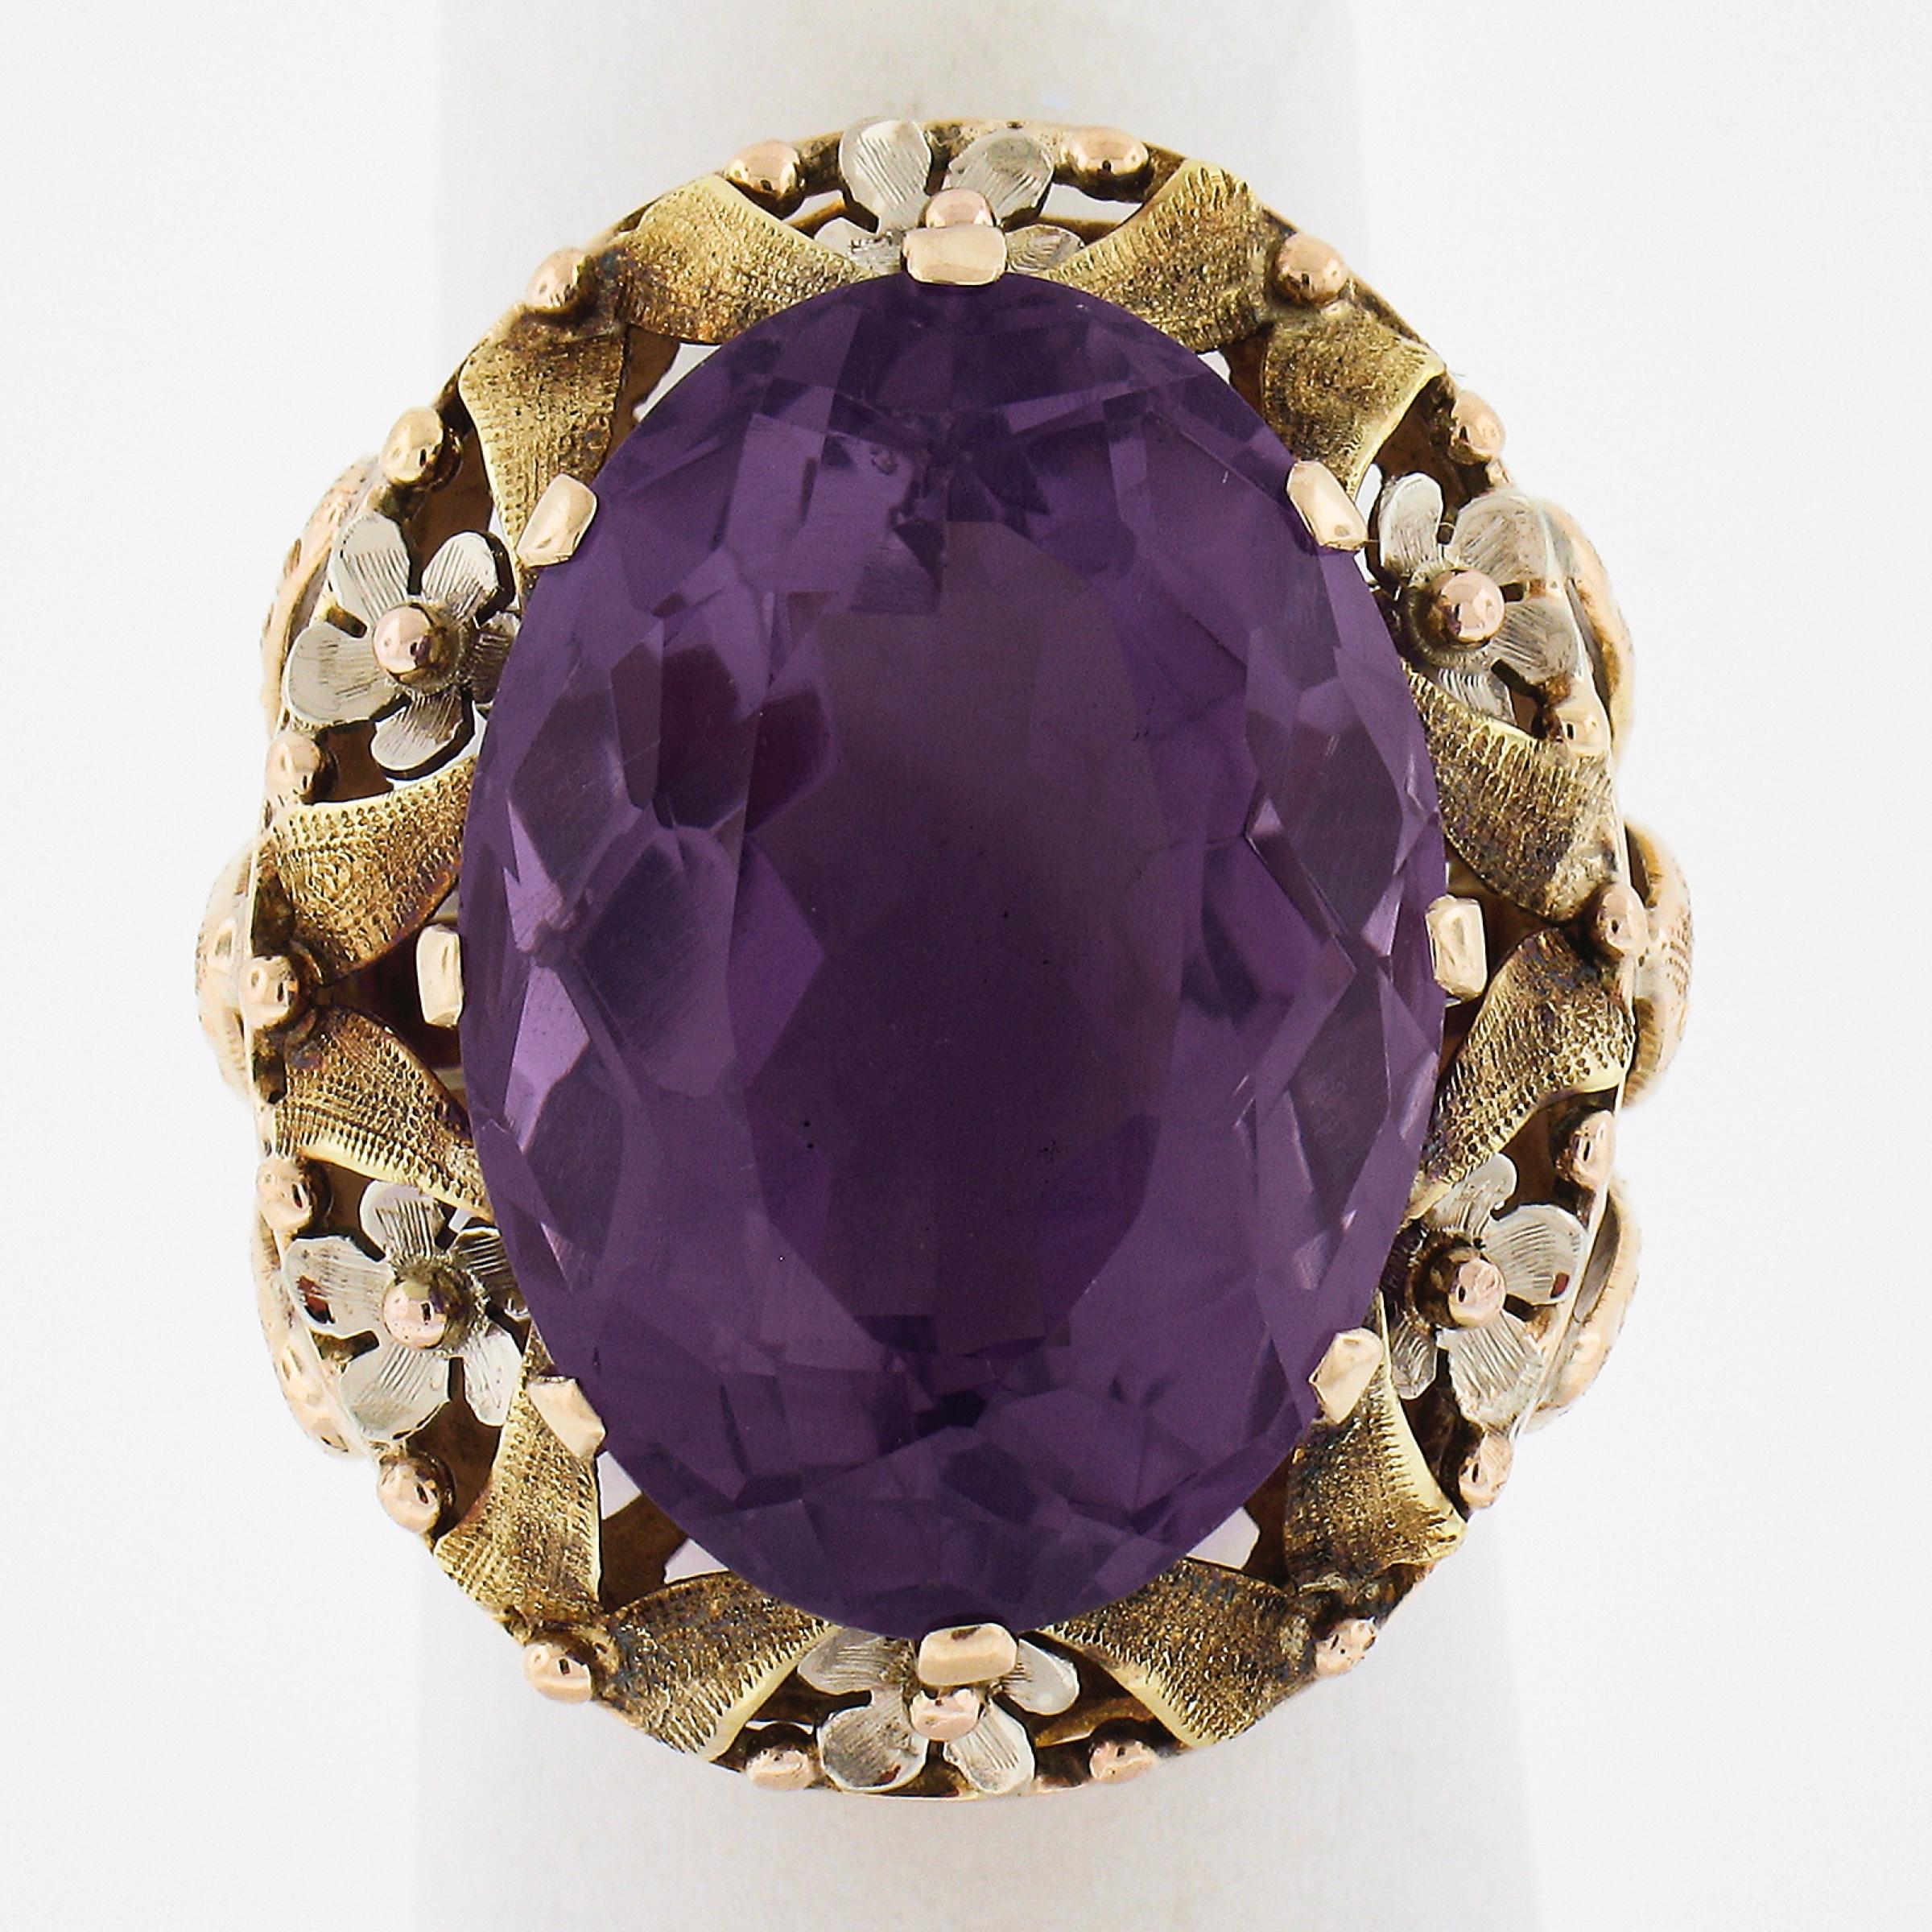 --Stone(s):--
(1) Natural Genuine Amethyst - Oval Cut - Multi-Prong Set - Rich Purple Color - 20.5x15mm - 16.3ct (approx.)

Material: Solid 14k Rosy Yellow Gold w/ White Gold Flowers & Green Gold Leaves
Weight: 13.1 Grams
Ring Size: 6.0 (Fitted on a